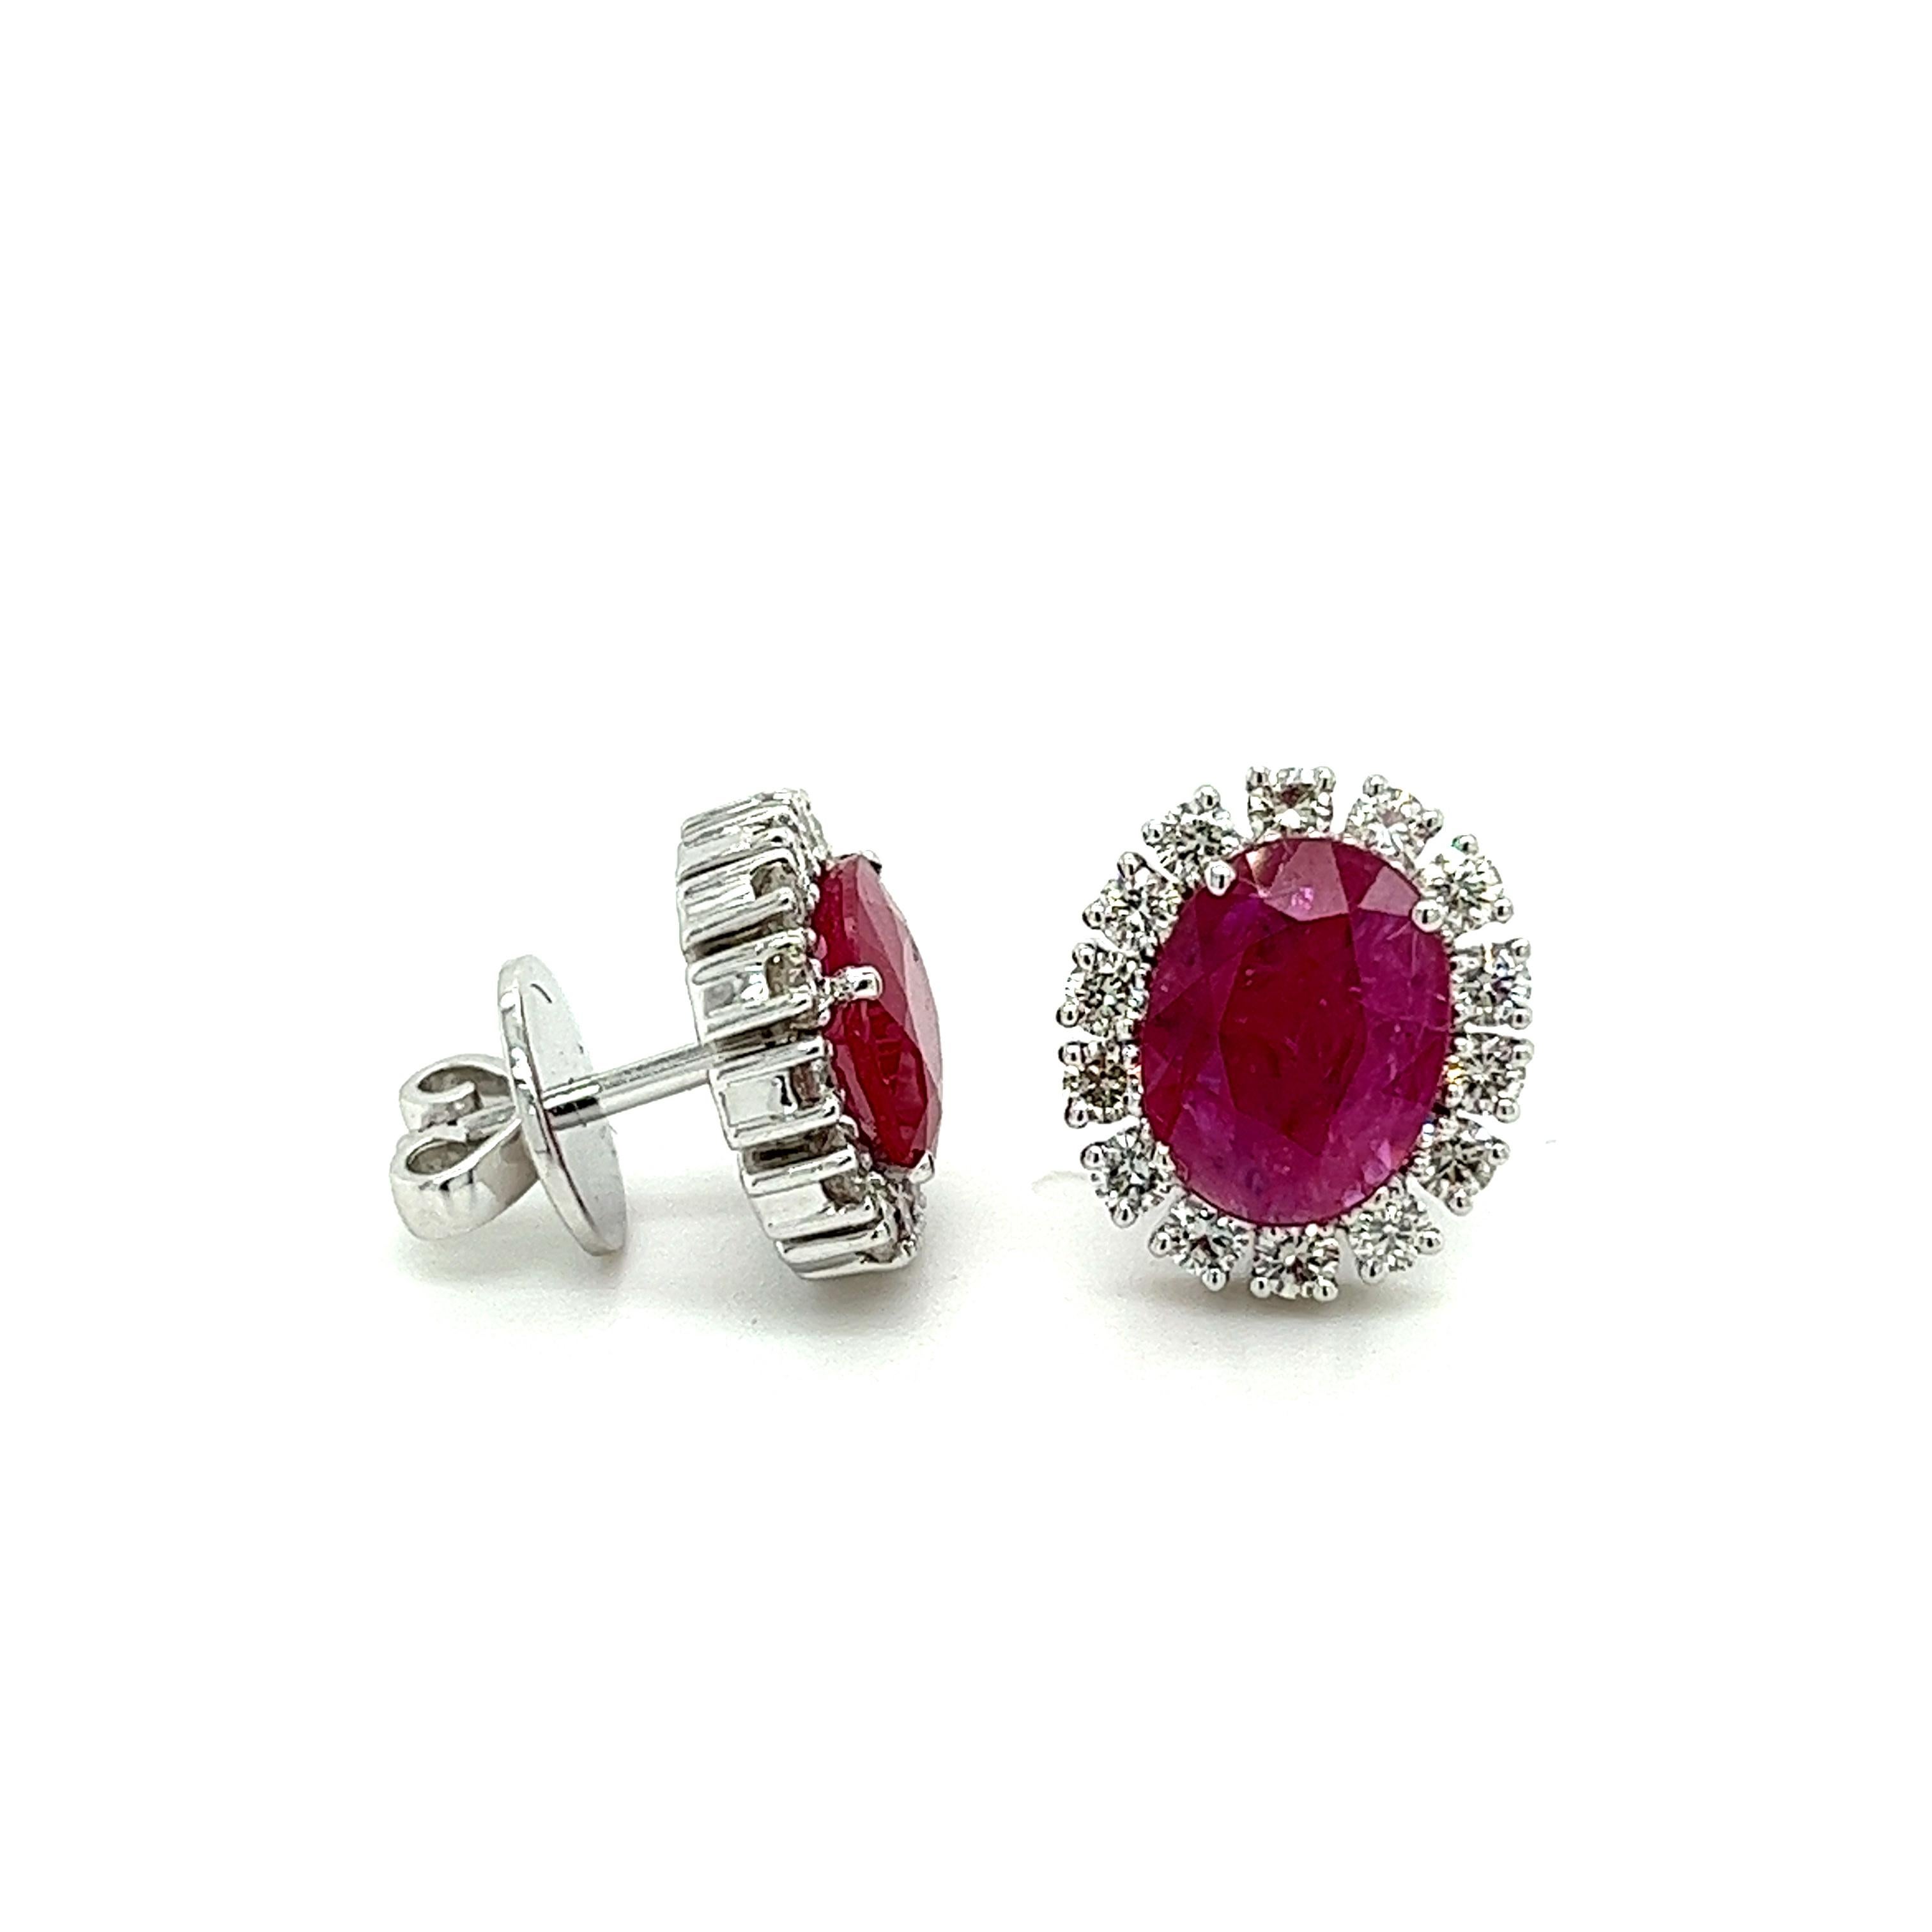 No Heat 3 Carat Oval Cut Ruby and Diamond Halo Stud Earrings in 18K White Gold In New Condition For Sale In Miami, FL